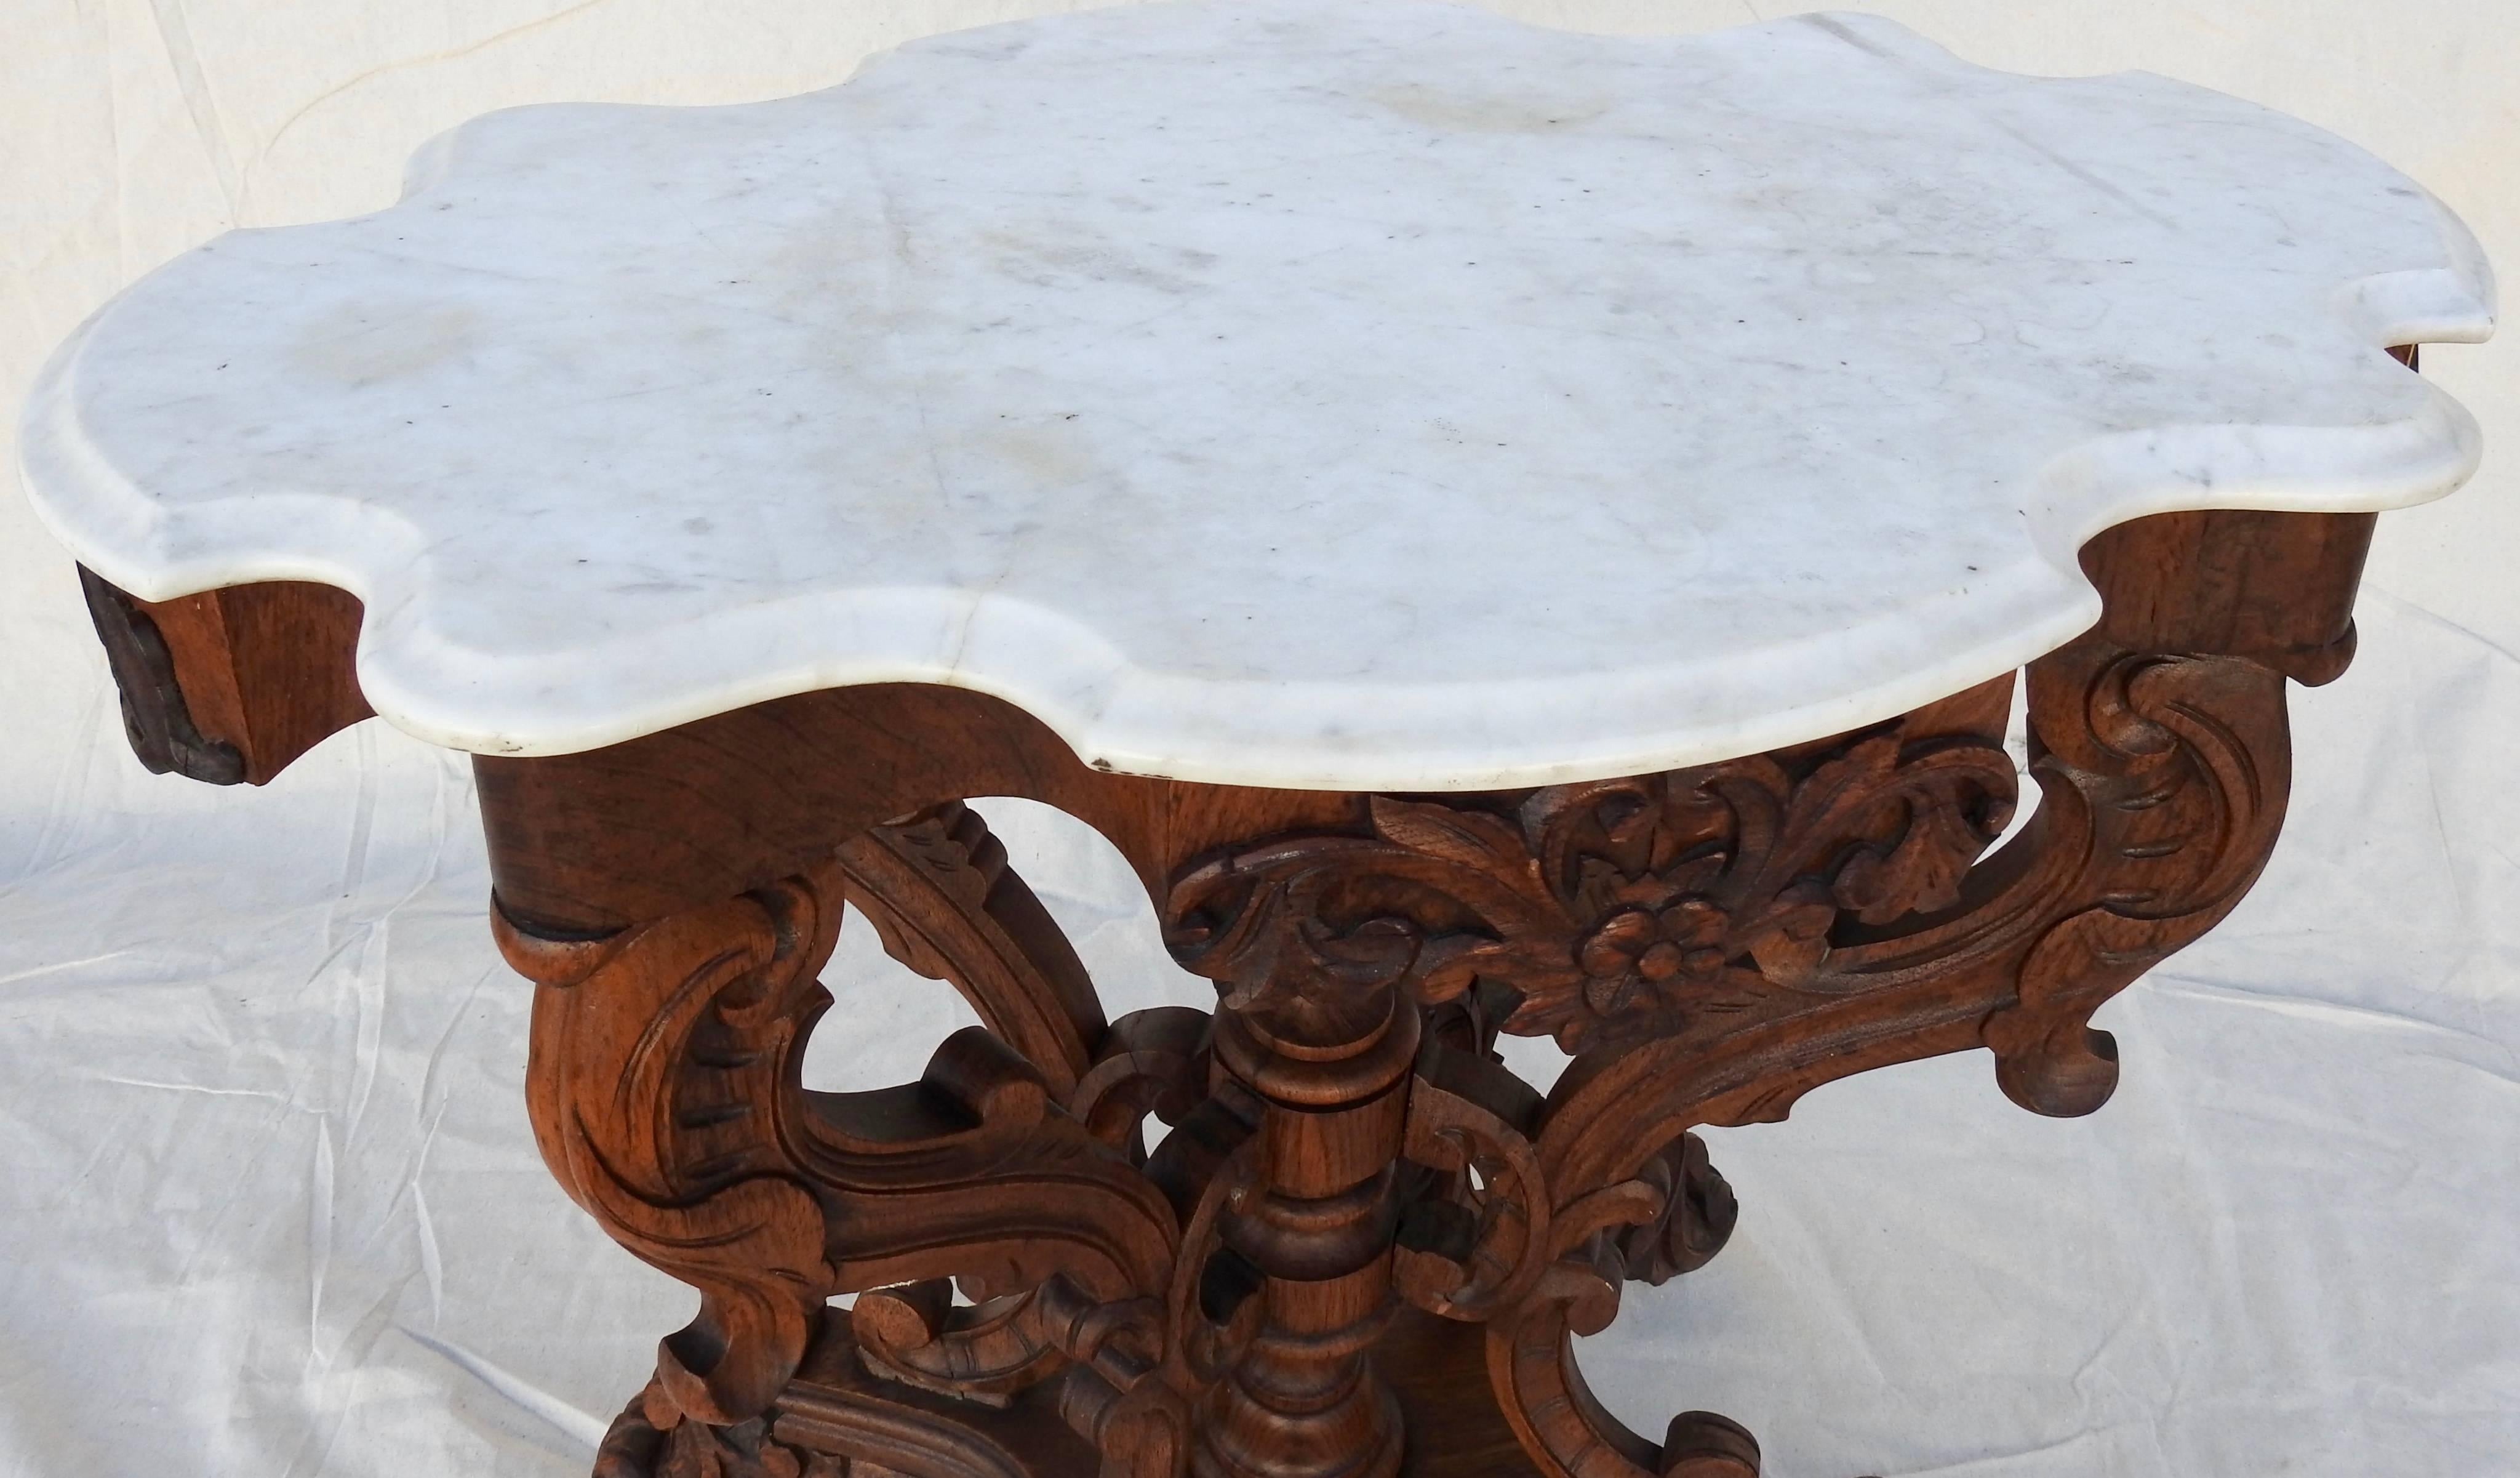 Offering this exquisite carved walnut Victorian marble-top table. A large hand carved finial in the center of the base is surrounded by lots of hand carved scrollwork and foliate details that make the pedestal and legs. The sides of the table have a